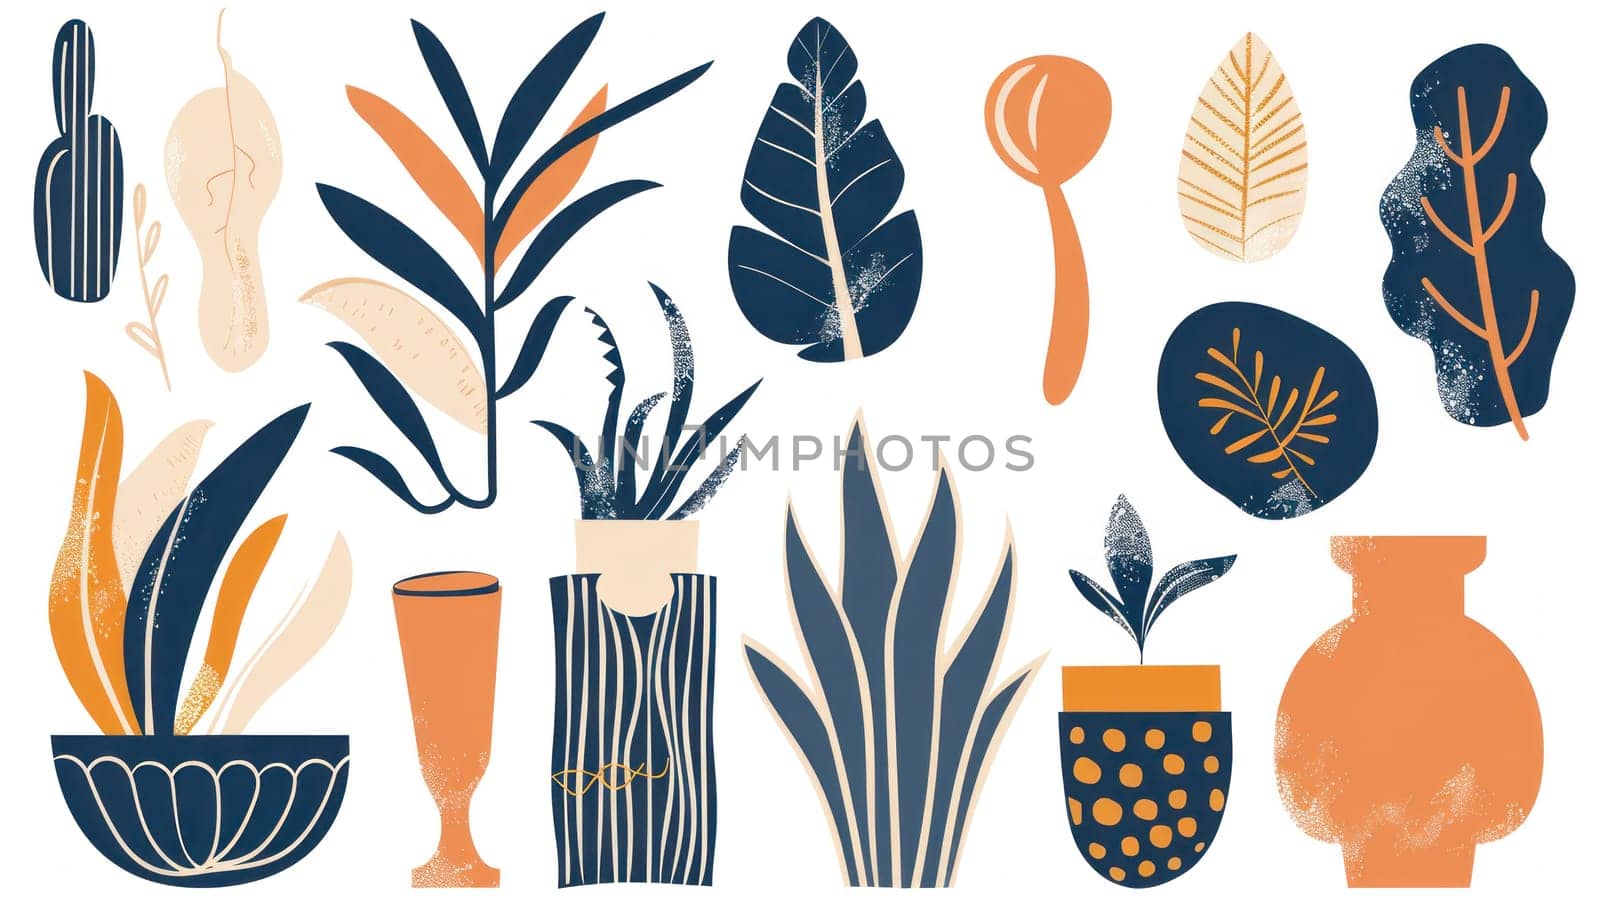 Collection of various plants and leaves in vases on white background for home decor and botanical design